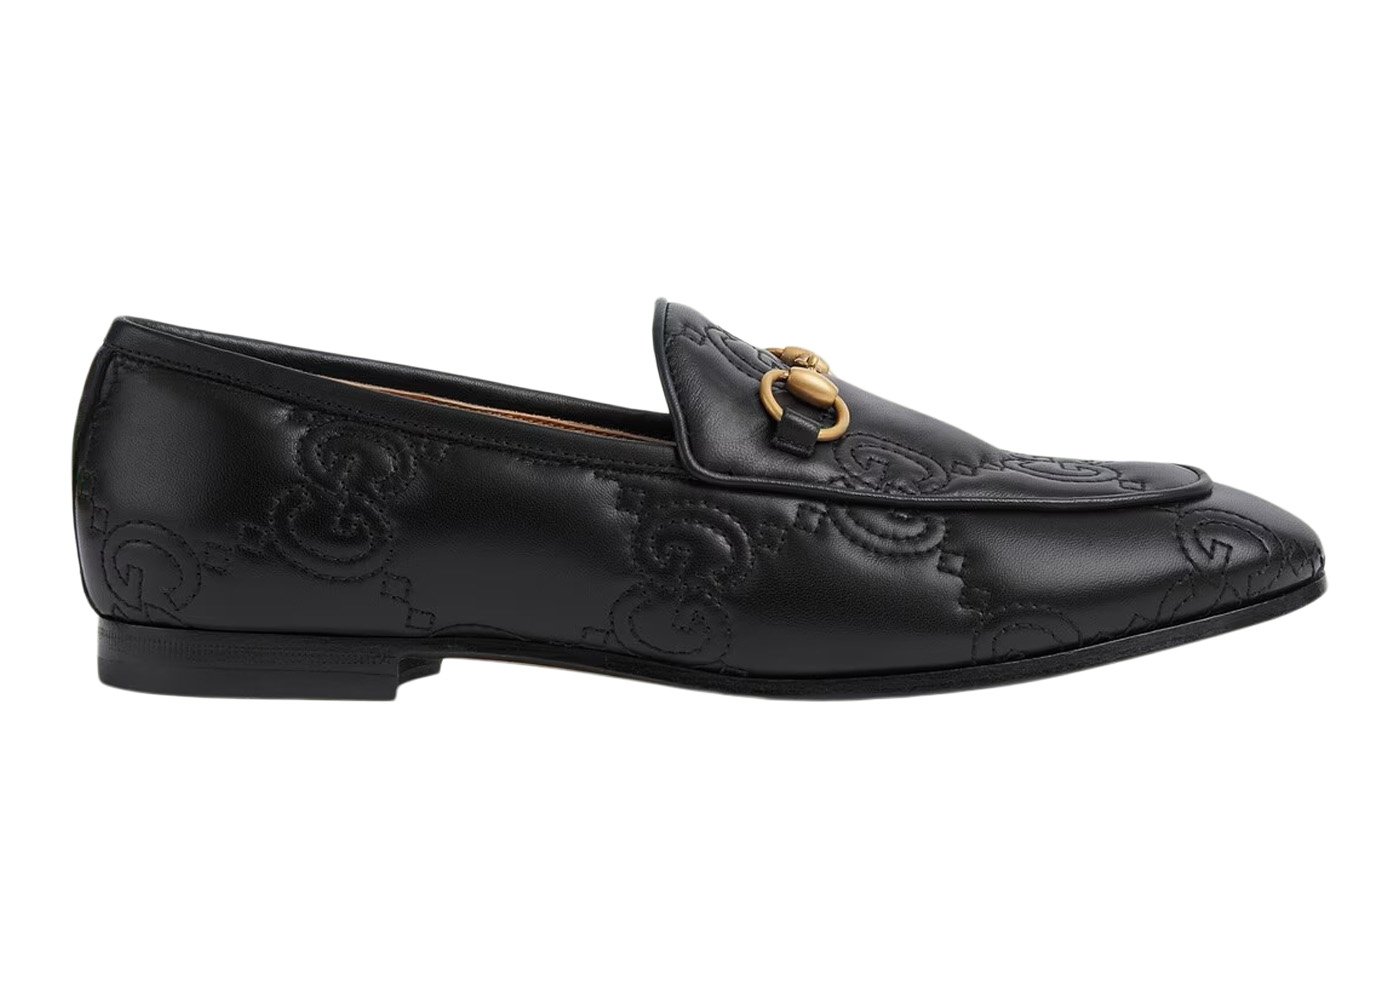 sneakers Gucci Jordaan Loafer Black GG Leather